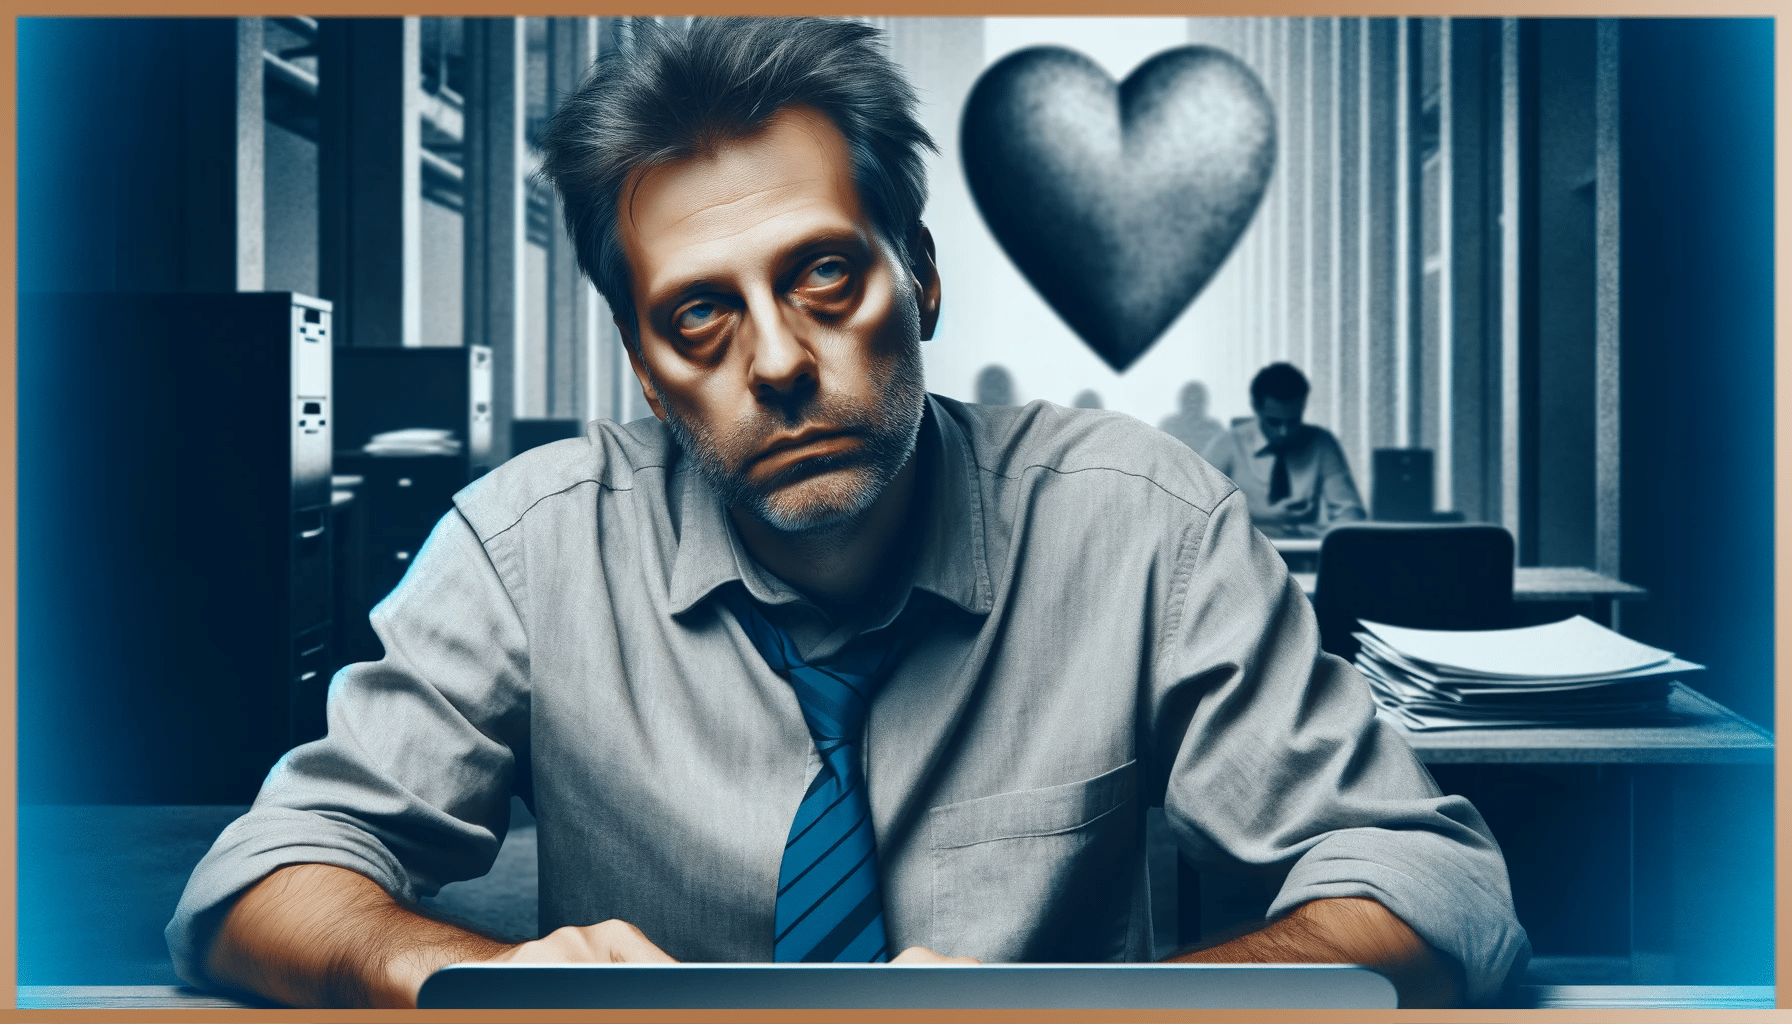 A weary man at his desk, with exhaustion evident in his eyes and a faint grey heart in the background, symbolizing the depletion of energy.